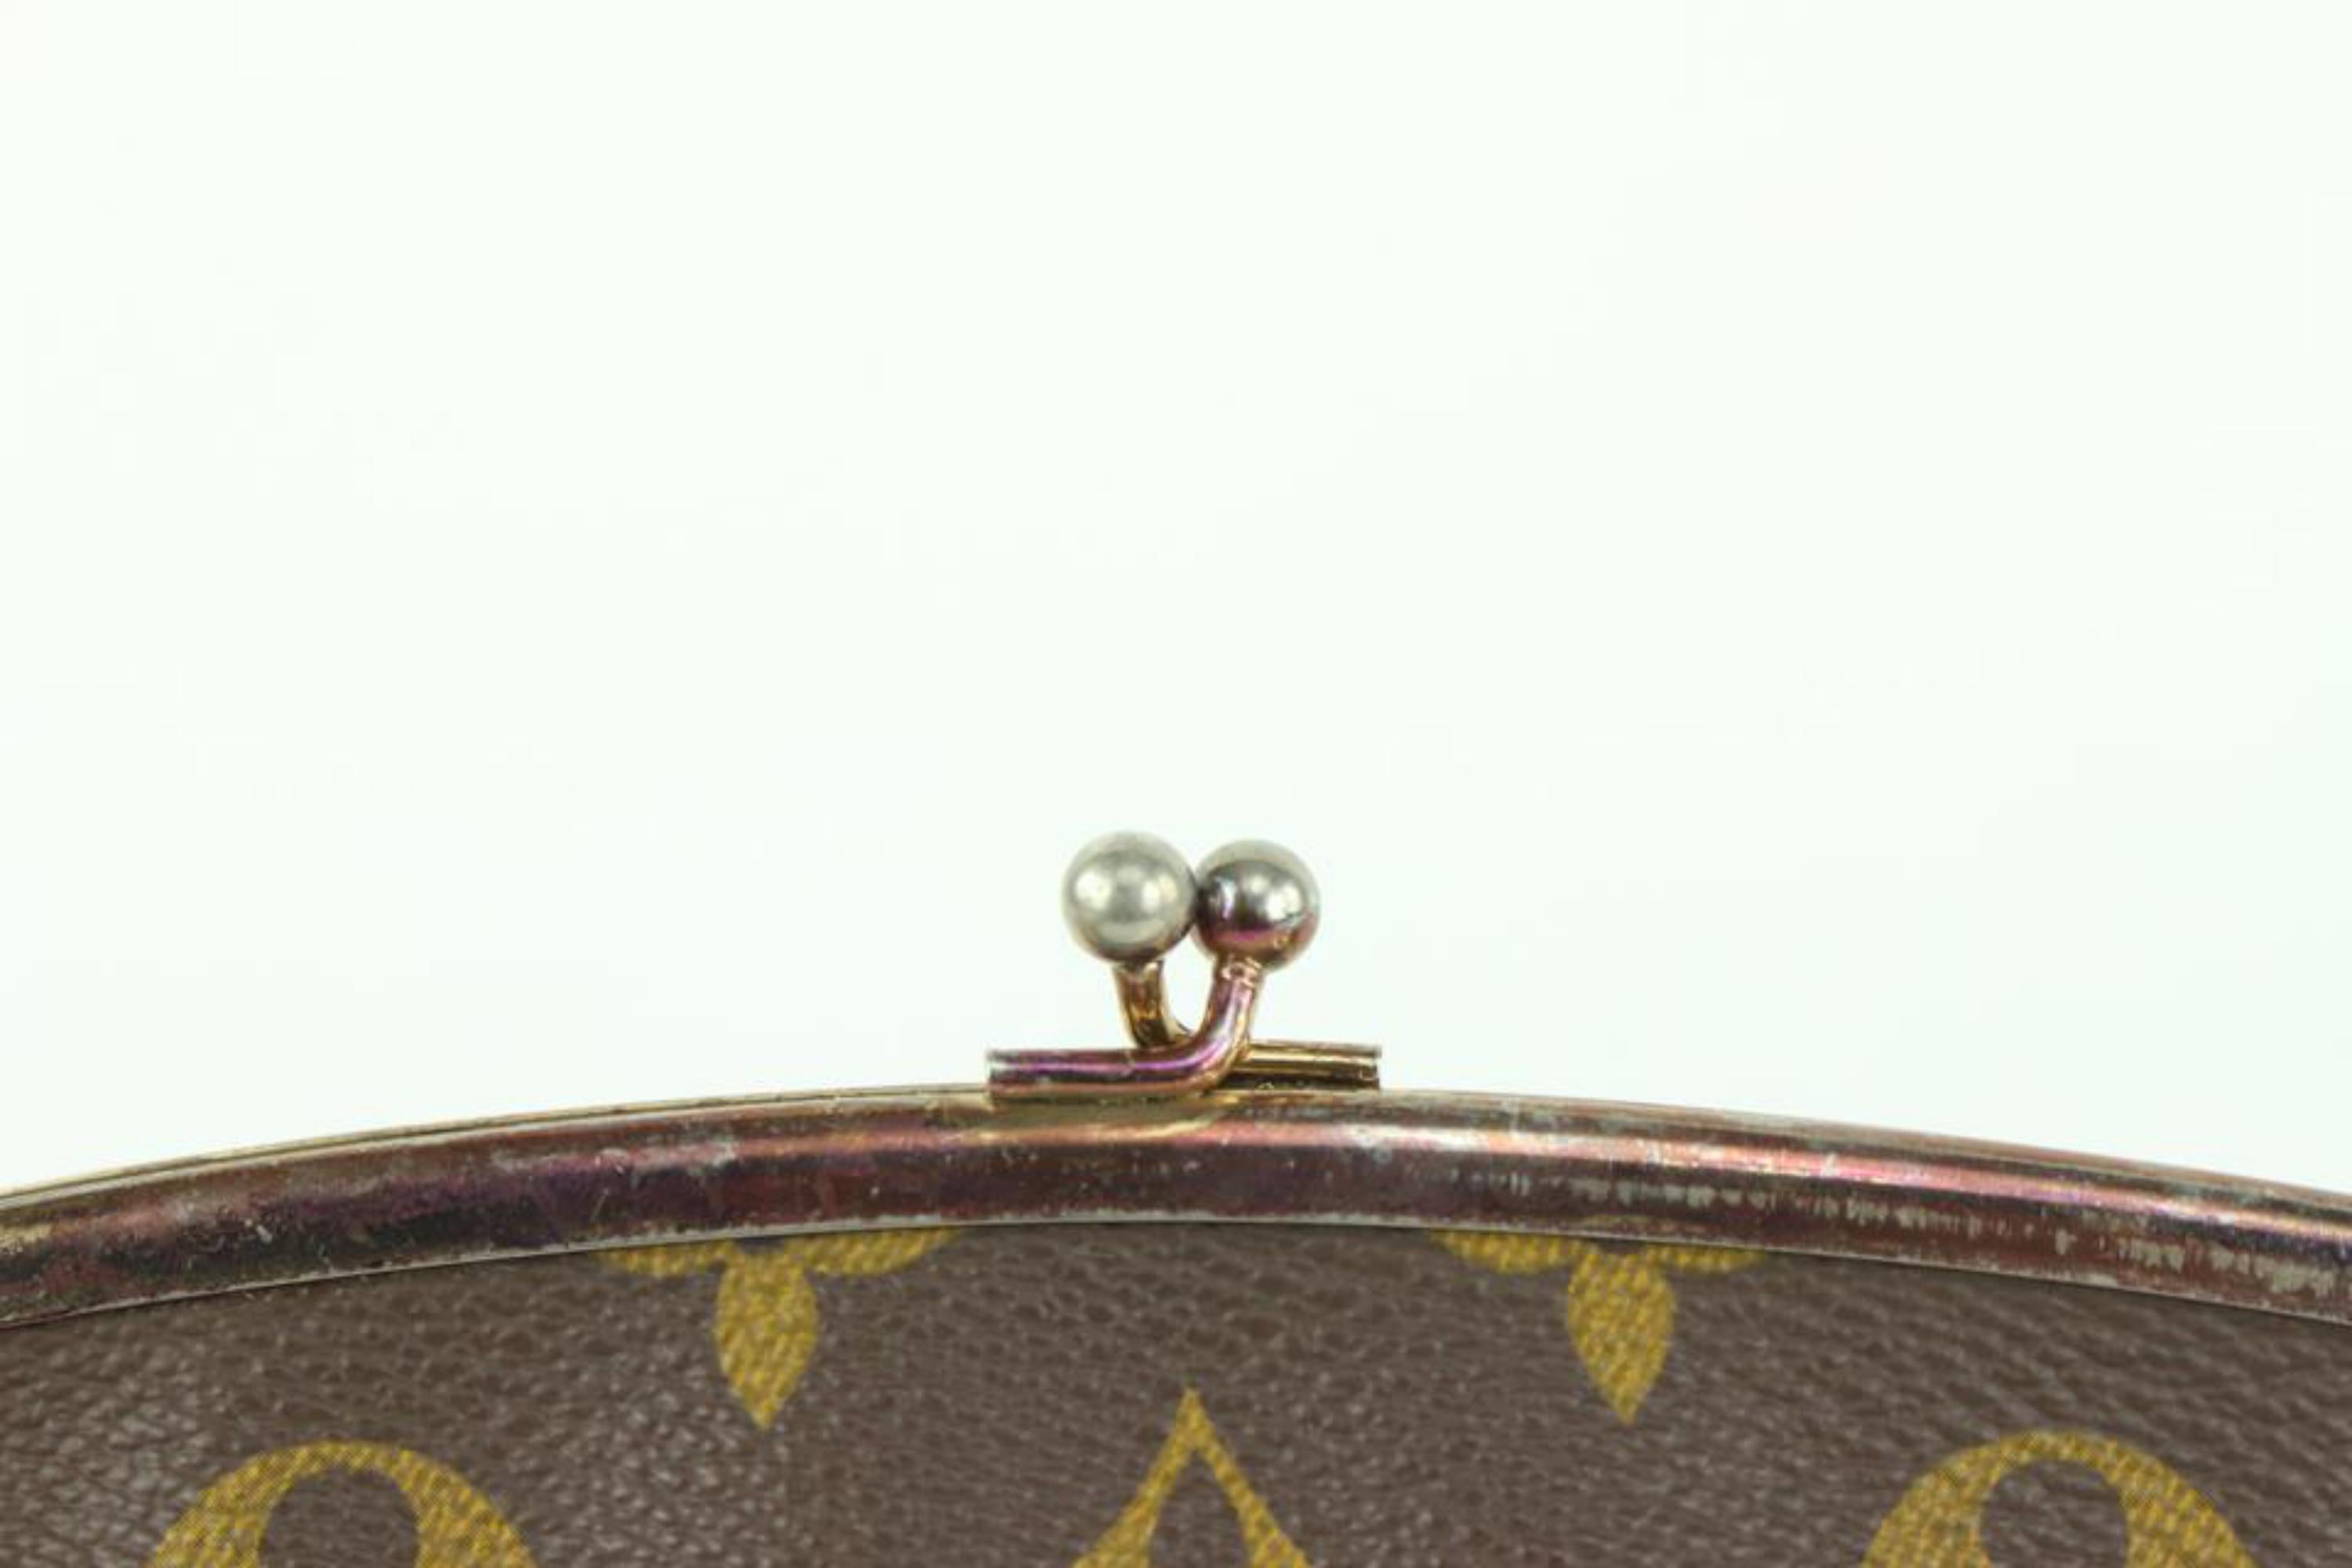 Louis Vuitton Monogram French Twist Purse Kisslock Pouch on Chain 101lv18 In Fair Condition For Sale In Dix hills, NY